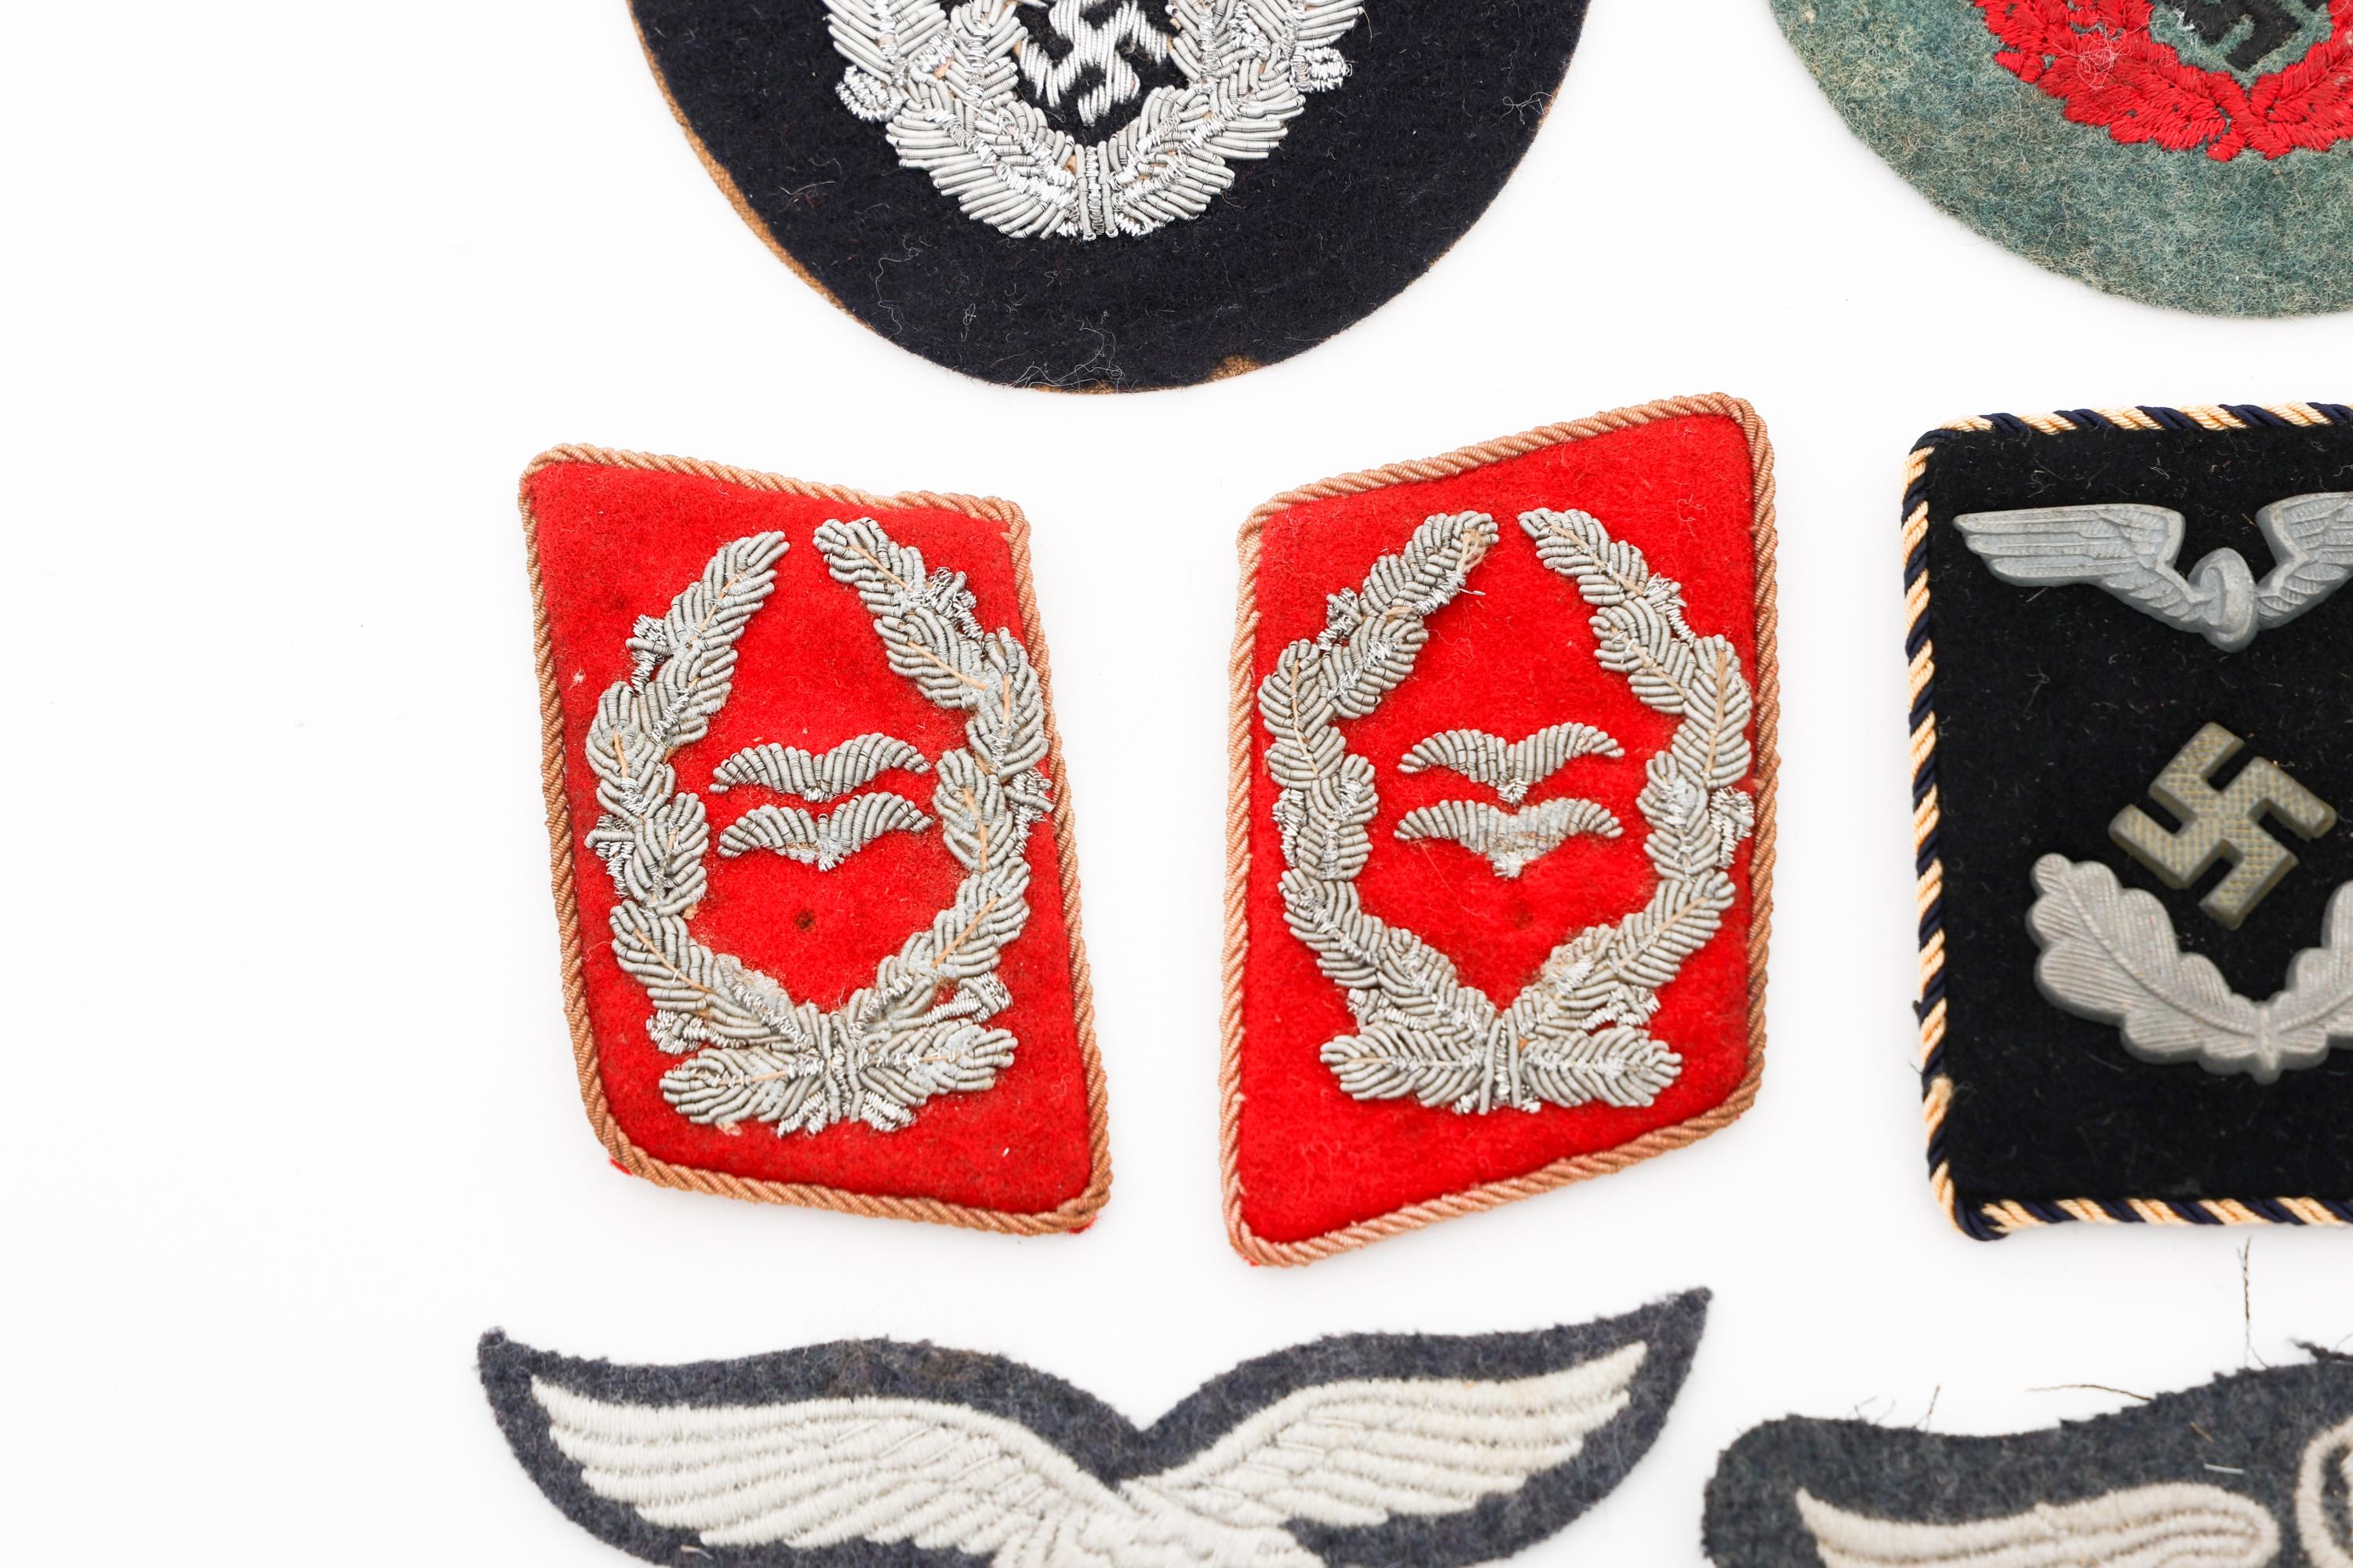 WWII GERMAN EAGLE INSIGNIA & TRADE PATCHES